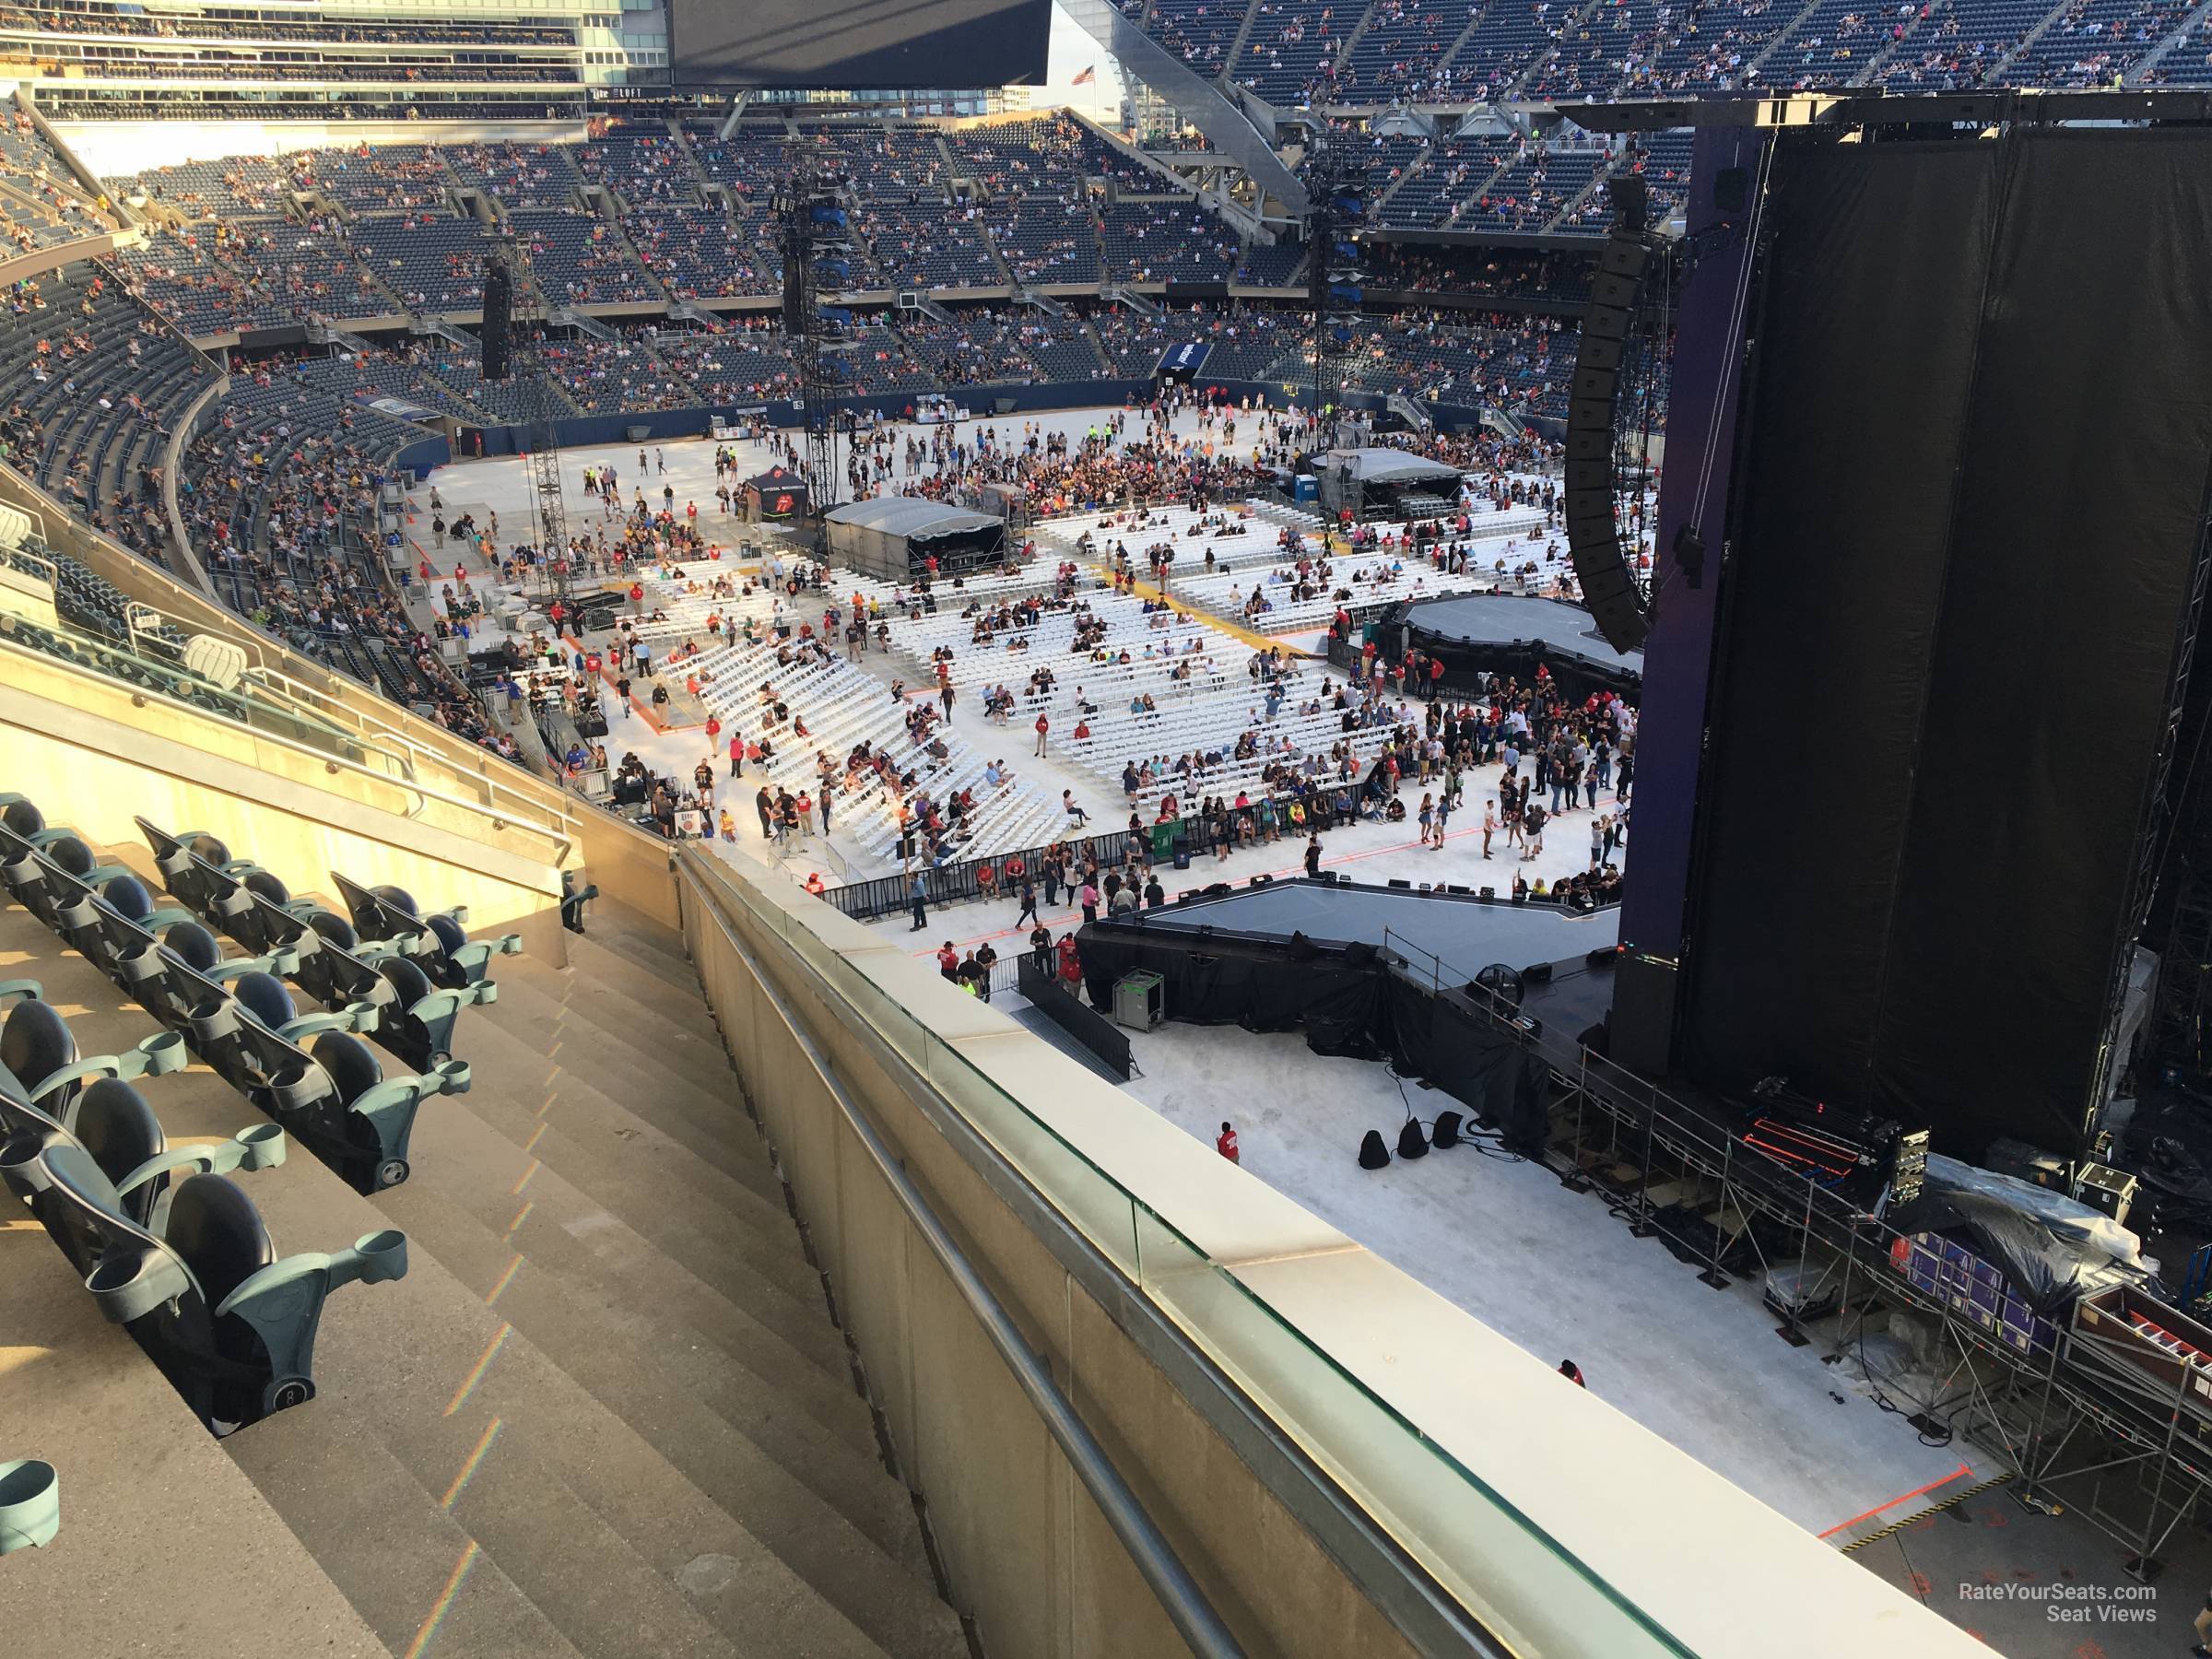 section 301, row 10 seat view  for concert - soldier field